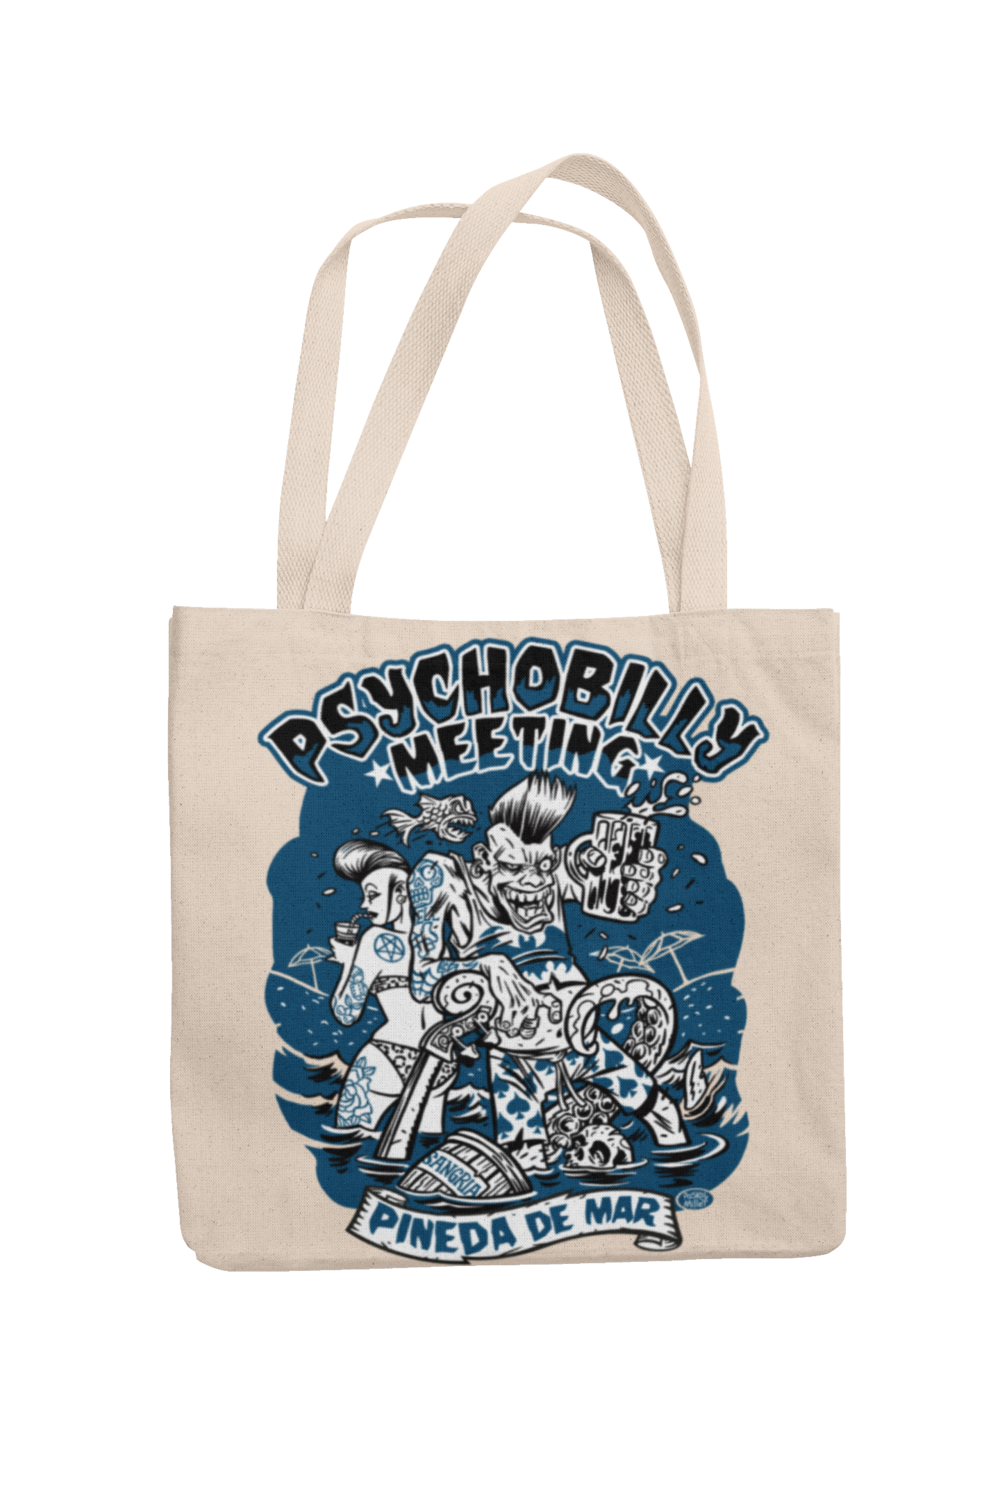 Cotton Bag Psychobilly meeting design by PASKAL 2019